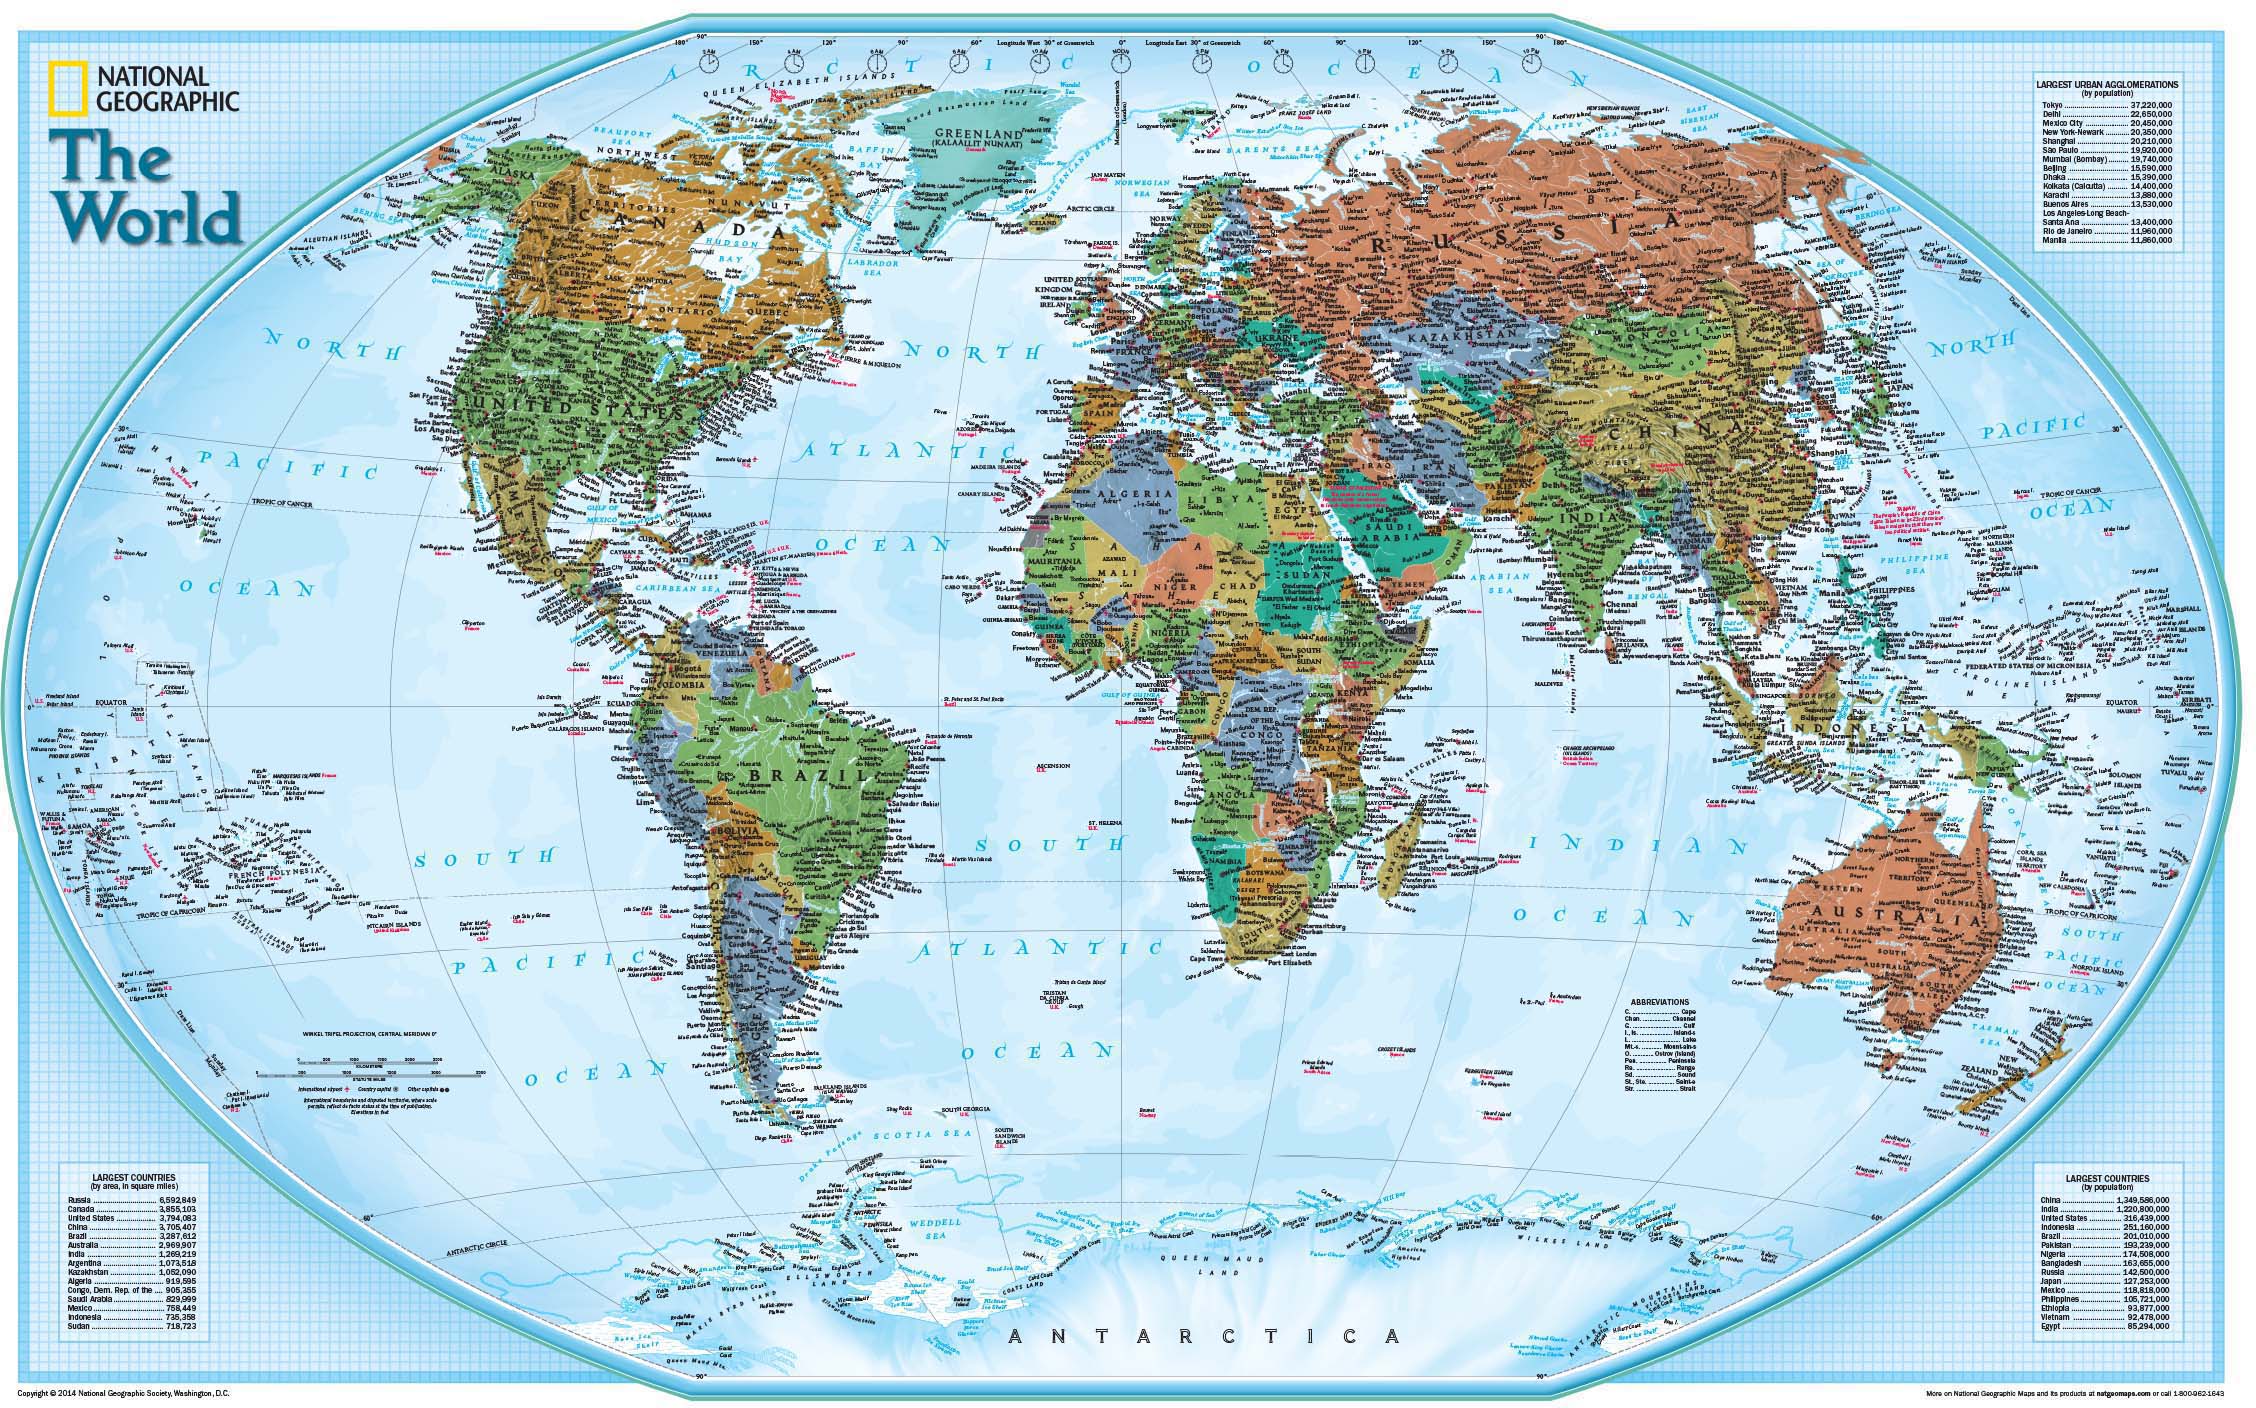 World Wall Map By Maps Of World Mapsales Images